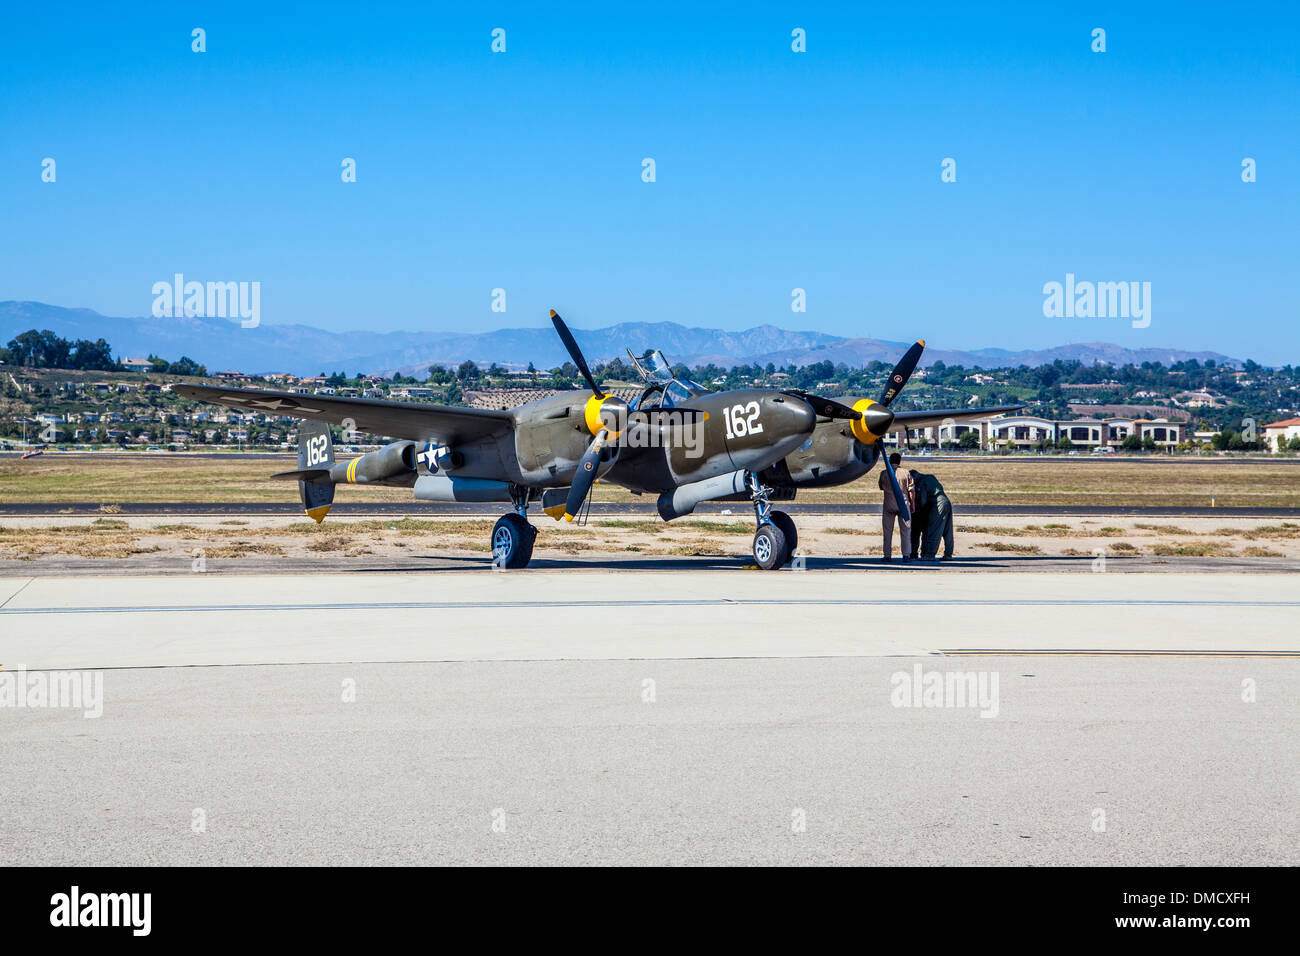 A P-38 Lightning At the Wings Over Camarillo Airshow in Camarillo California in August of 2011 Stock Photo